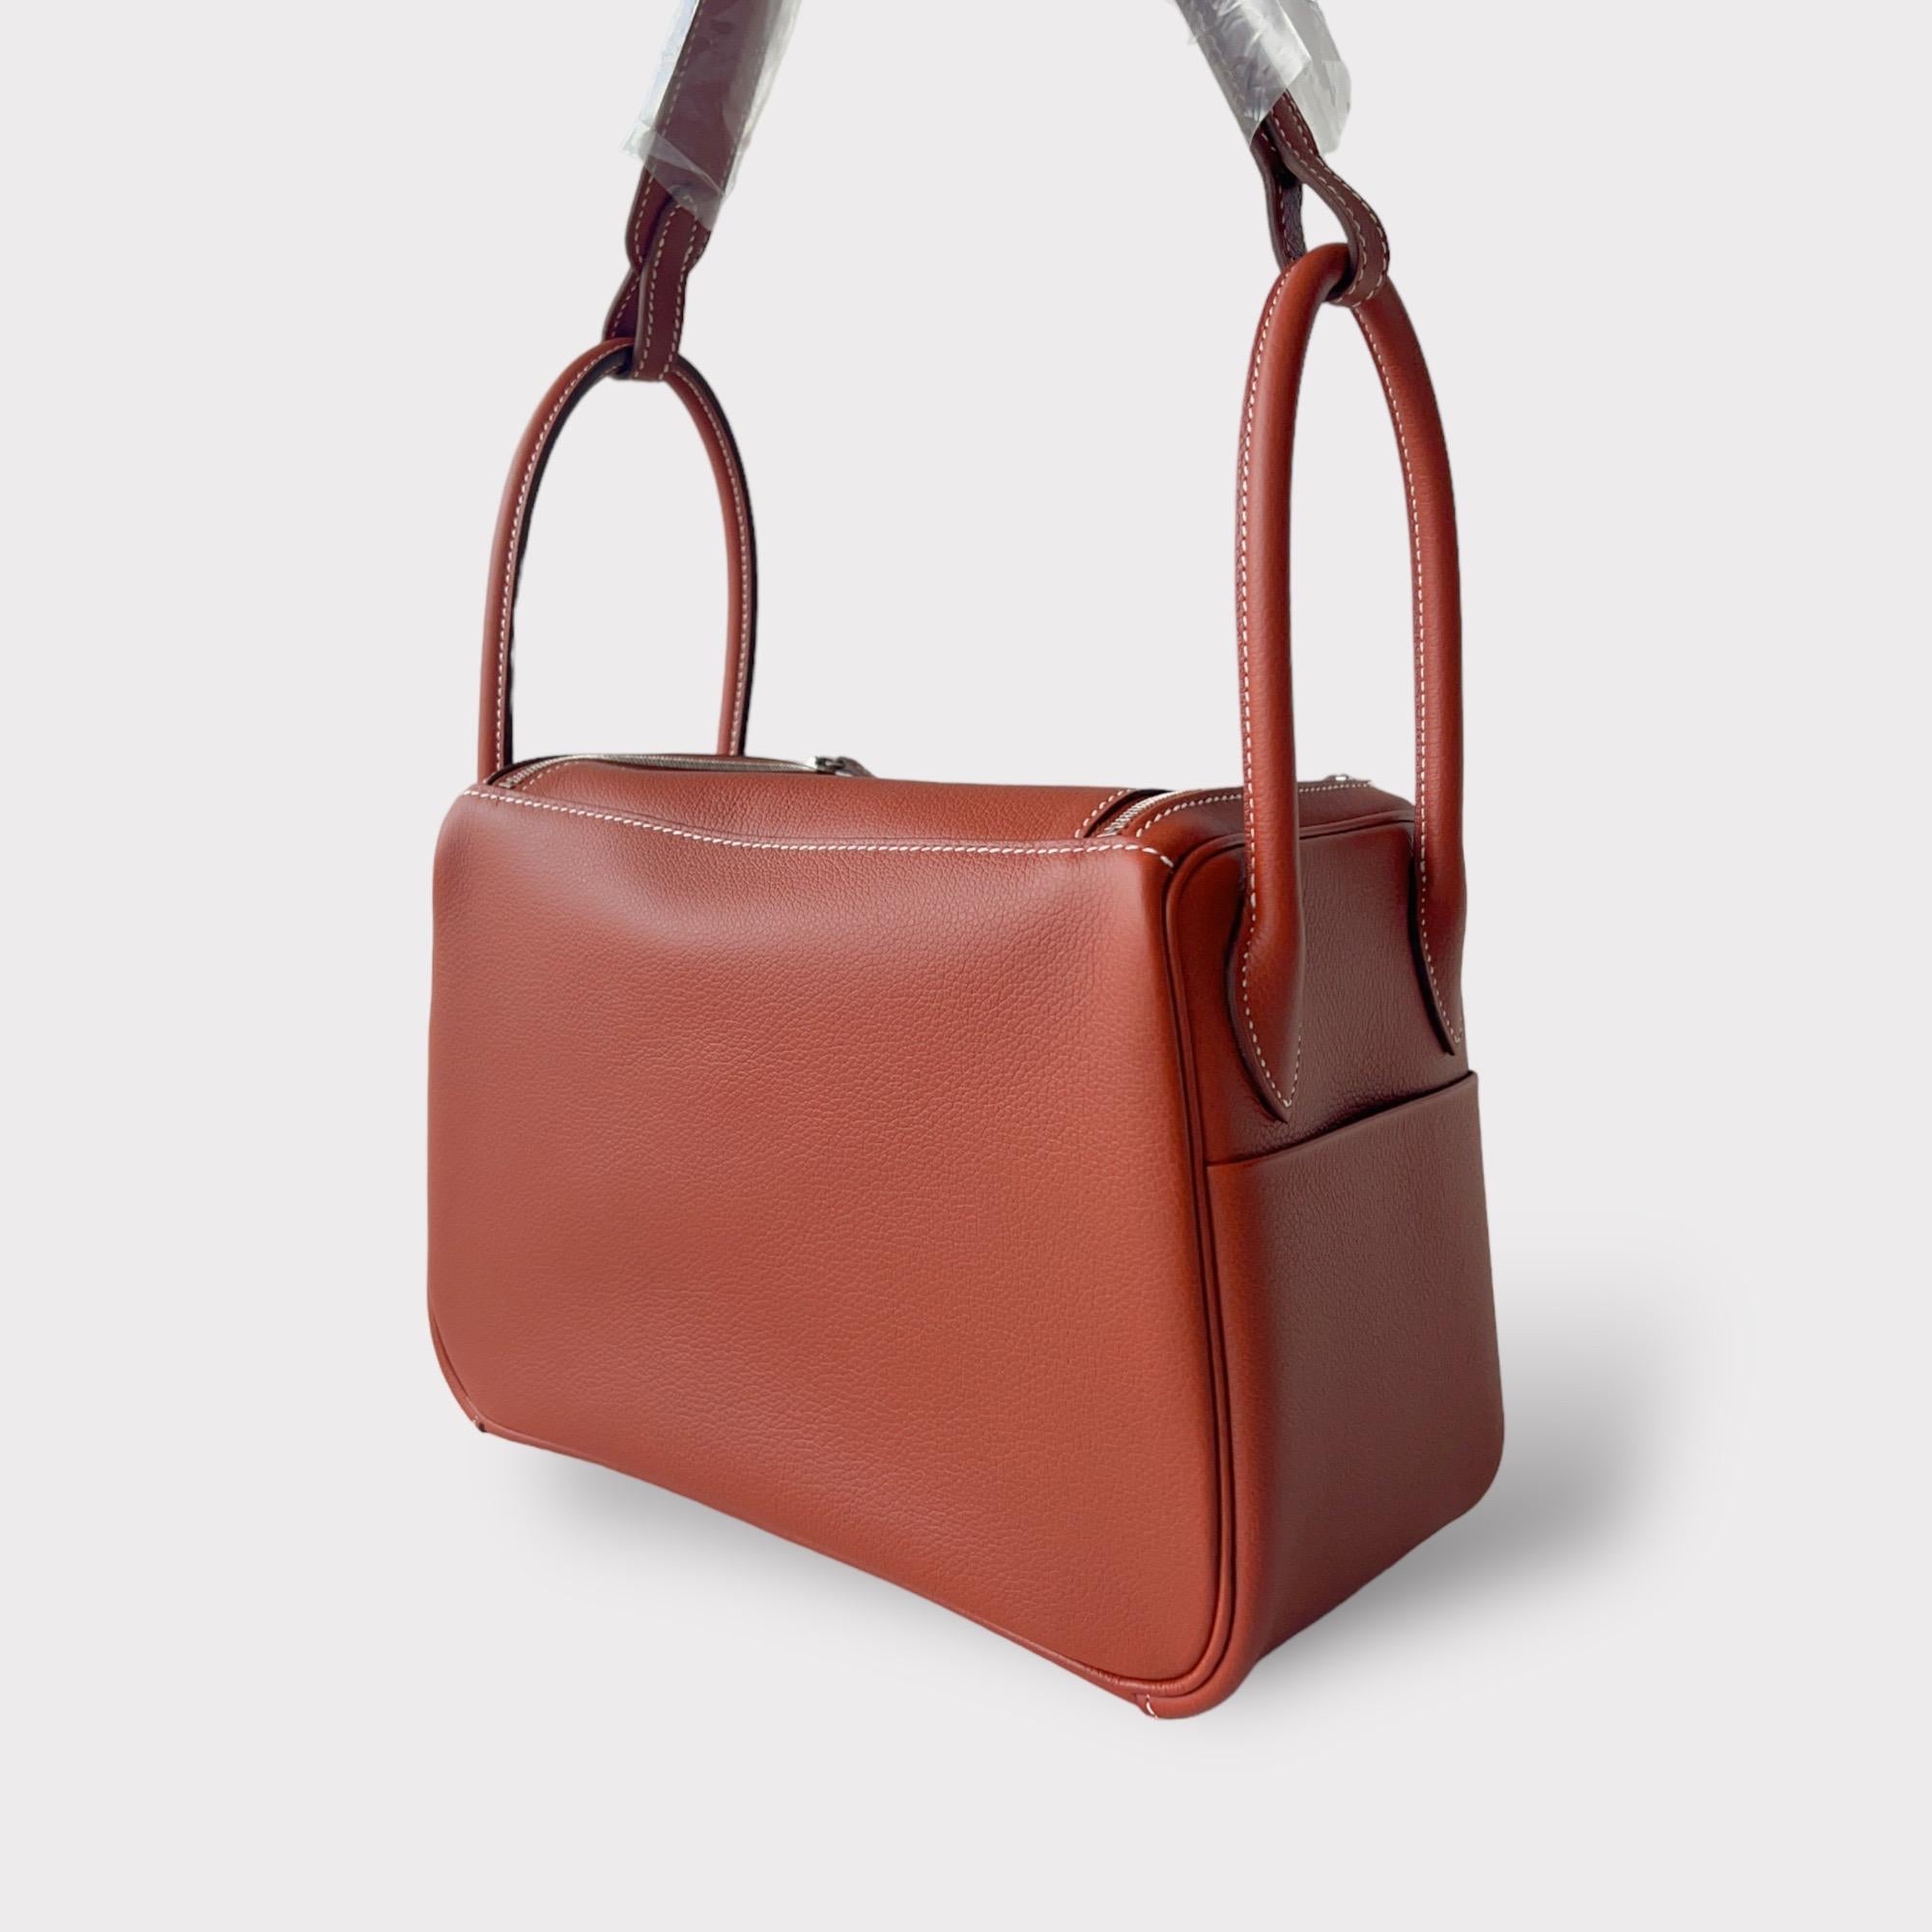 Hermes Lindy 26 Bag In Sienne With Palladium Hardware, Evercolor Leather 3